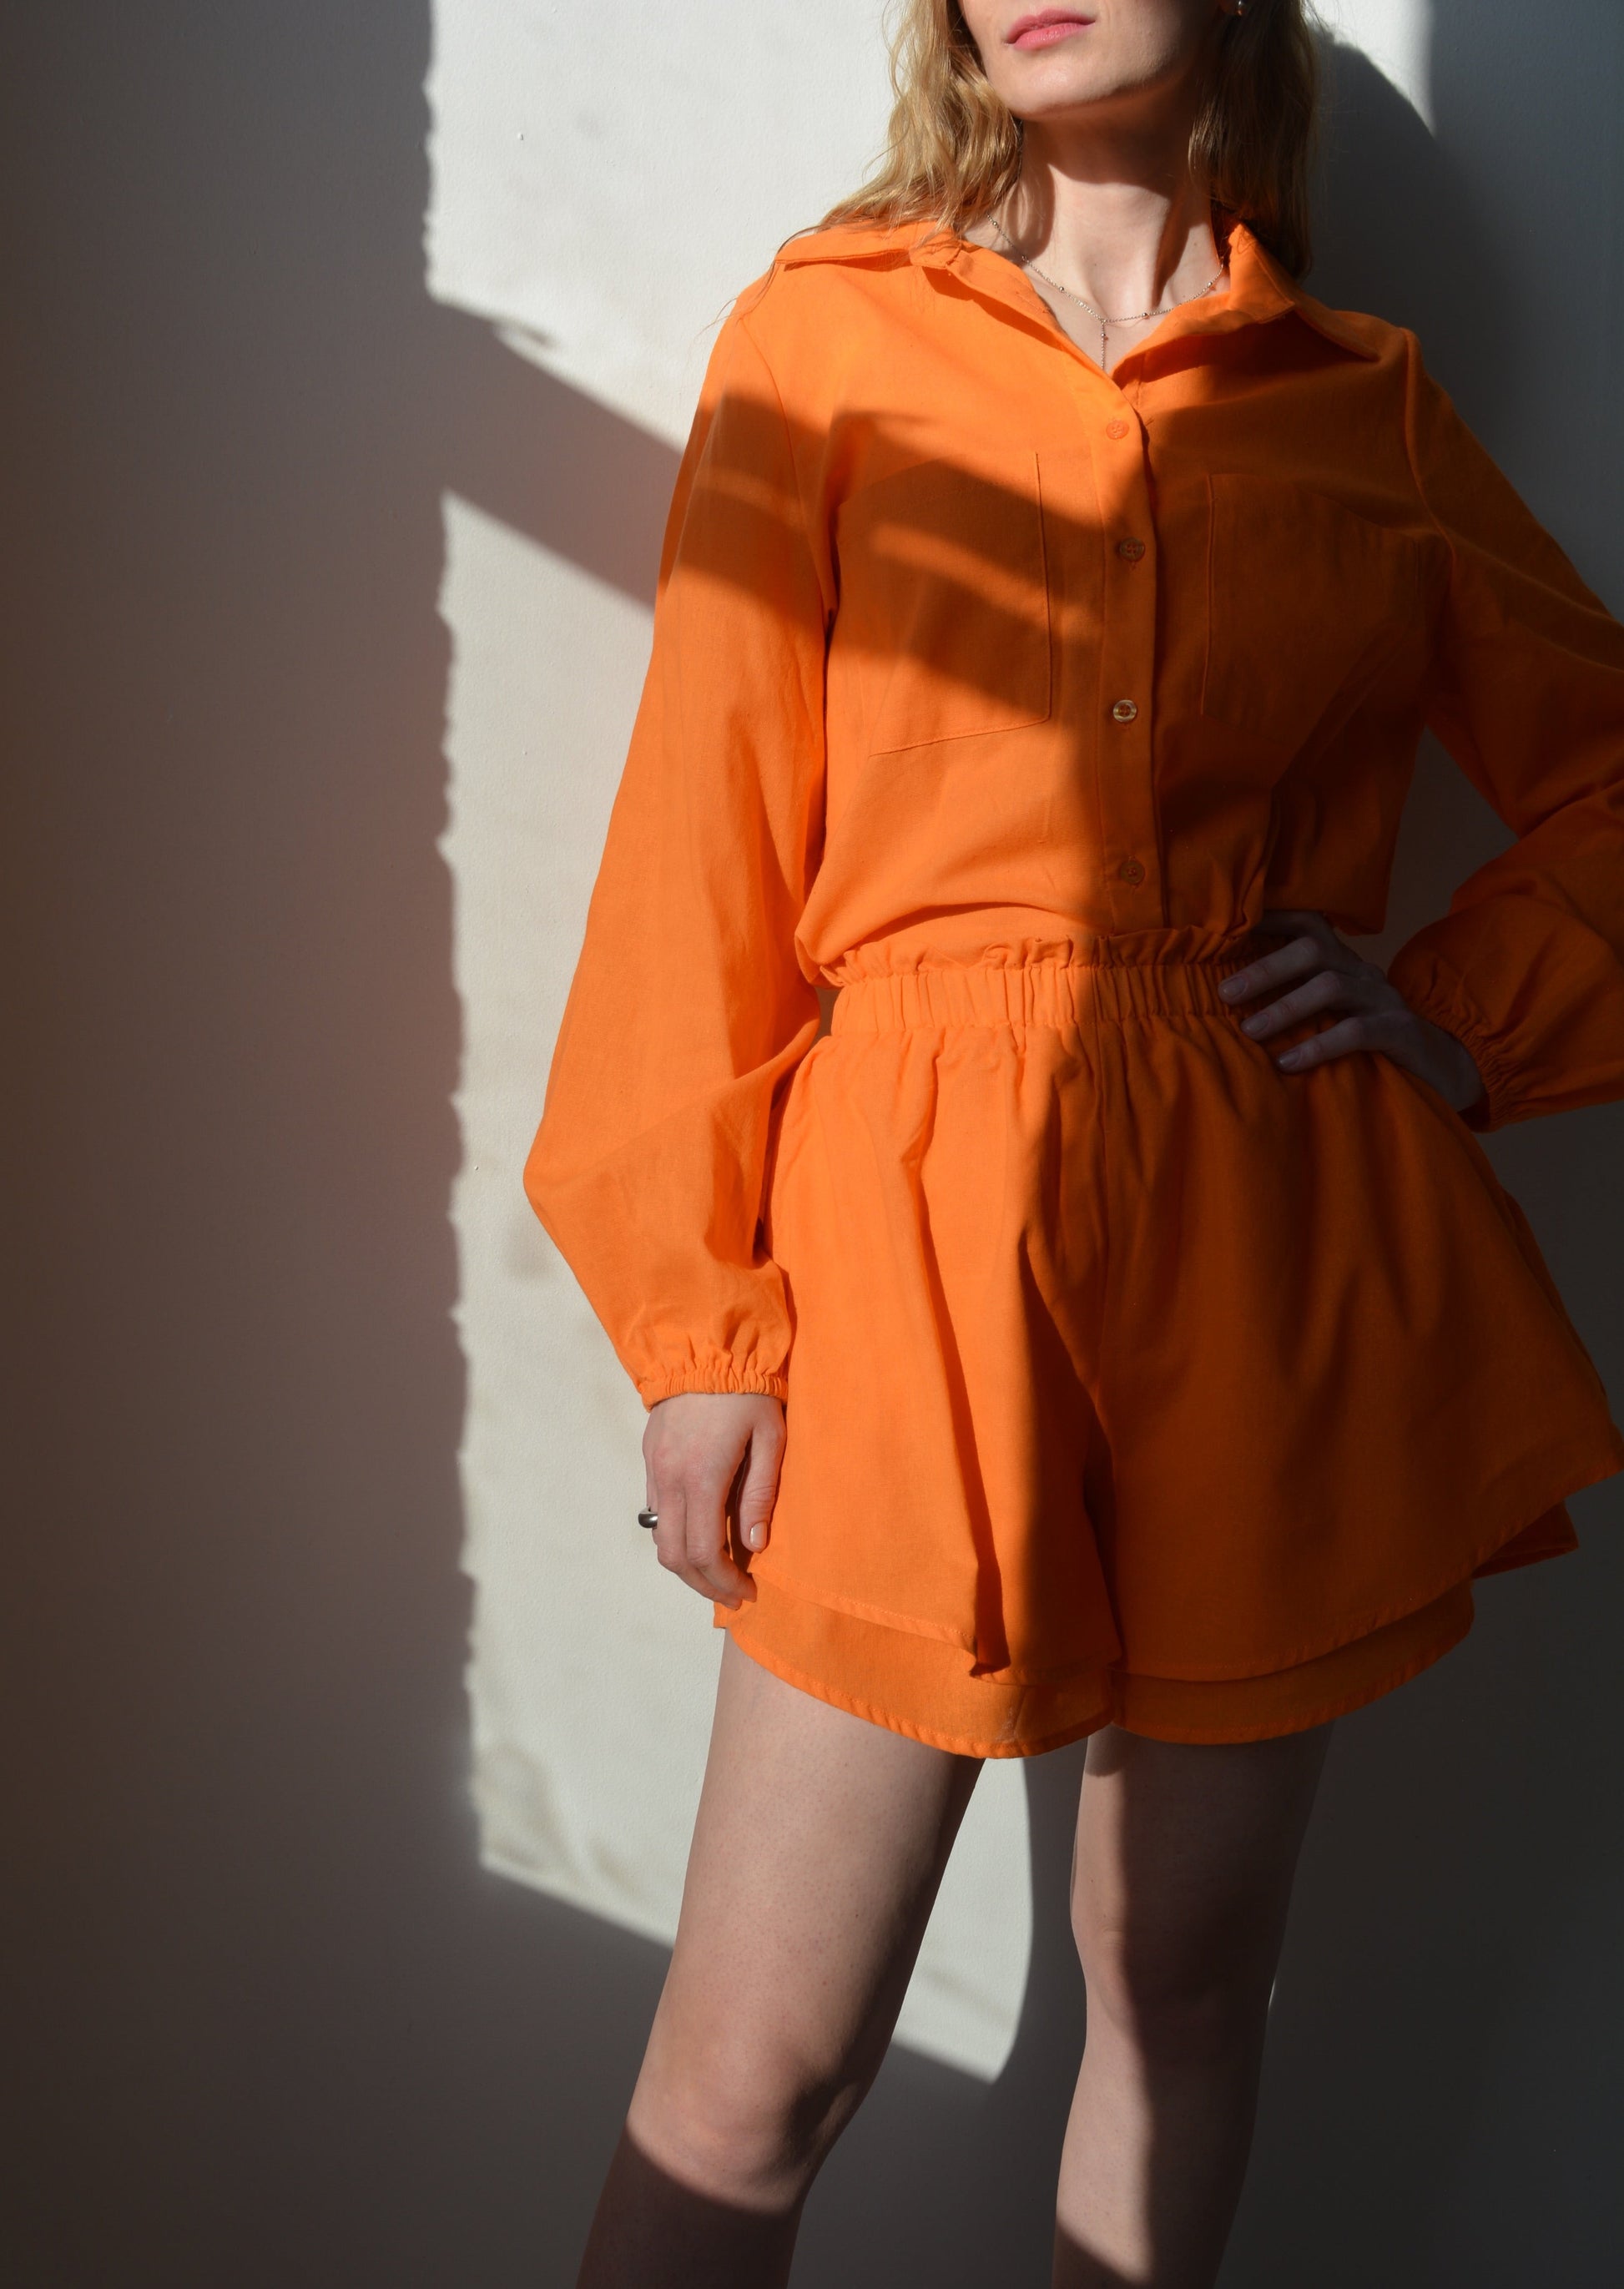 Two Piece Set - Cotton Blouse and Shorts in Tangerine color